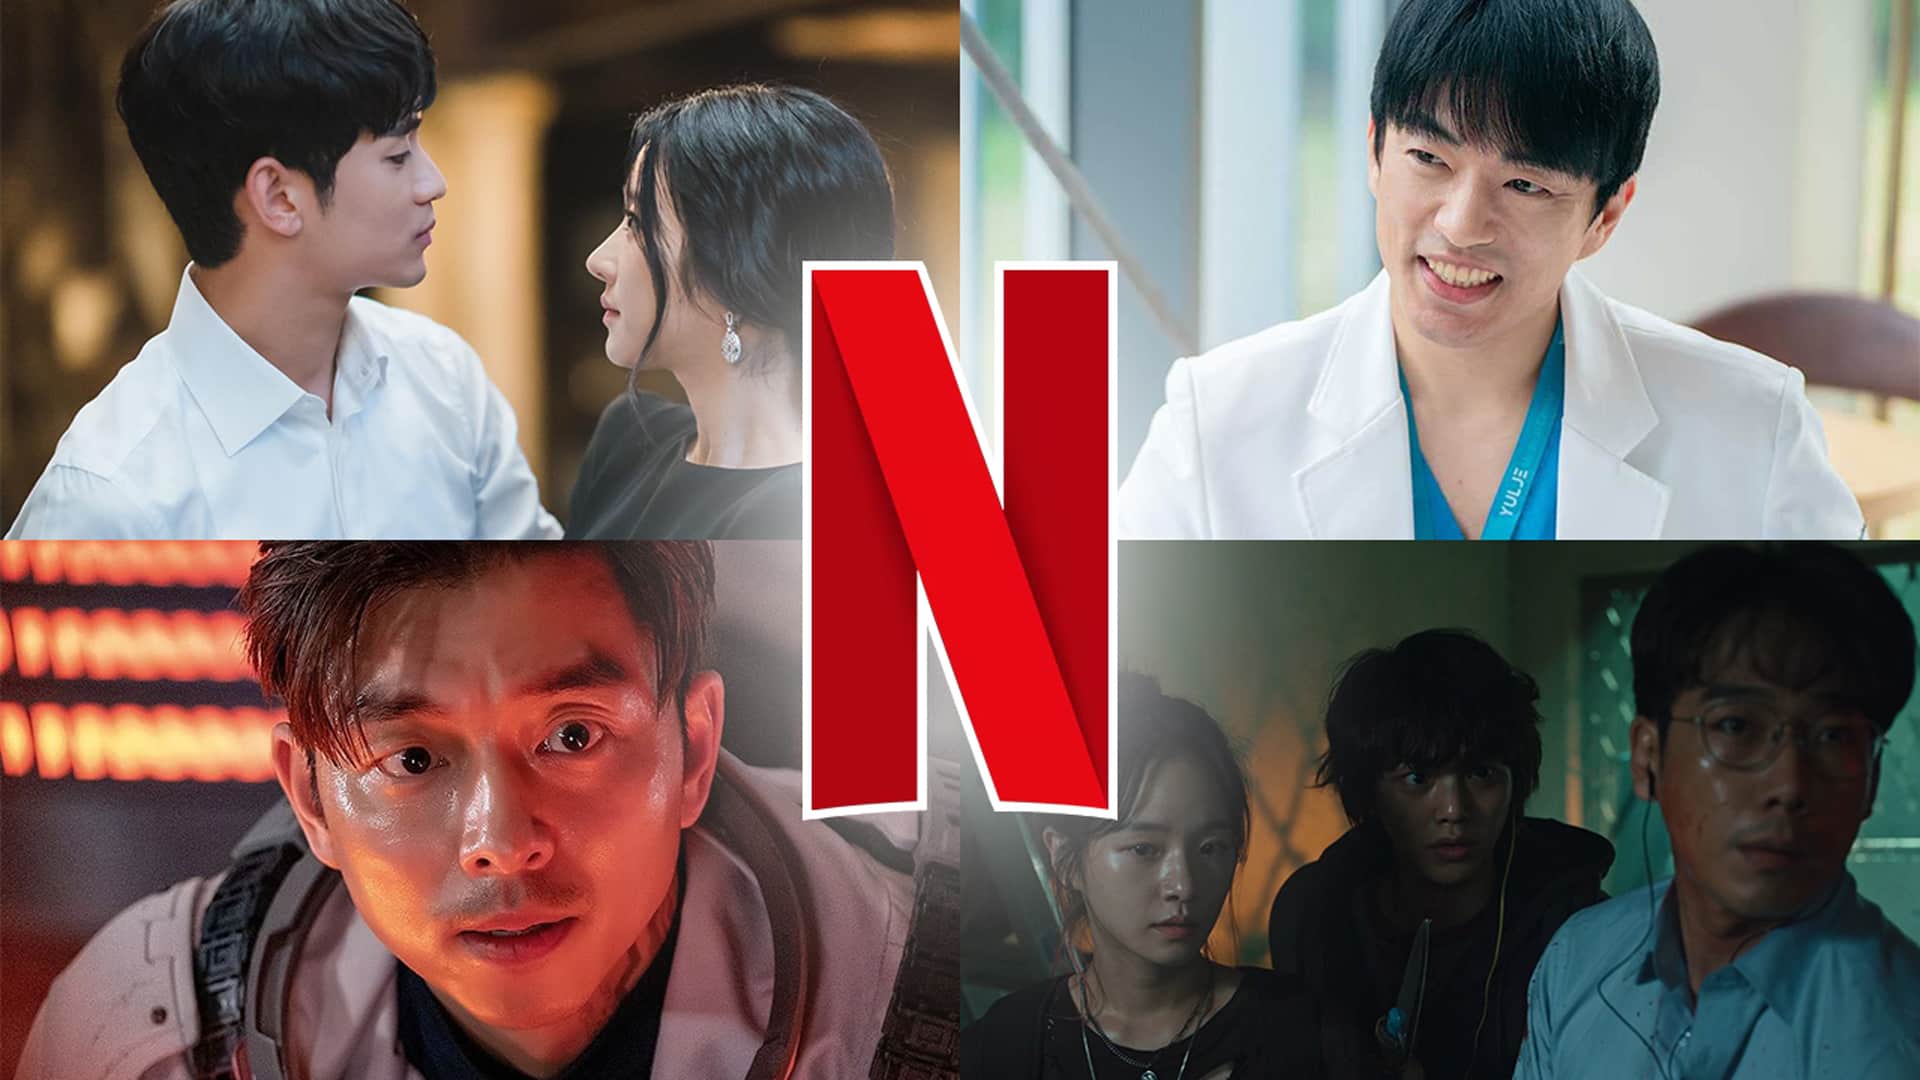 5 Things you should know about Netflix K-drama The Silent Sea's